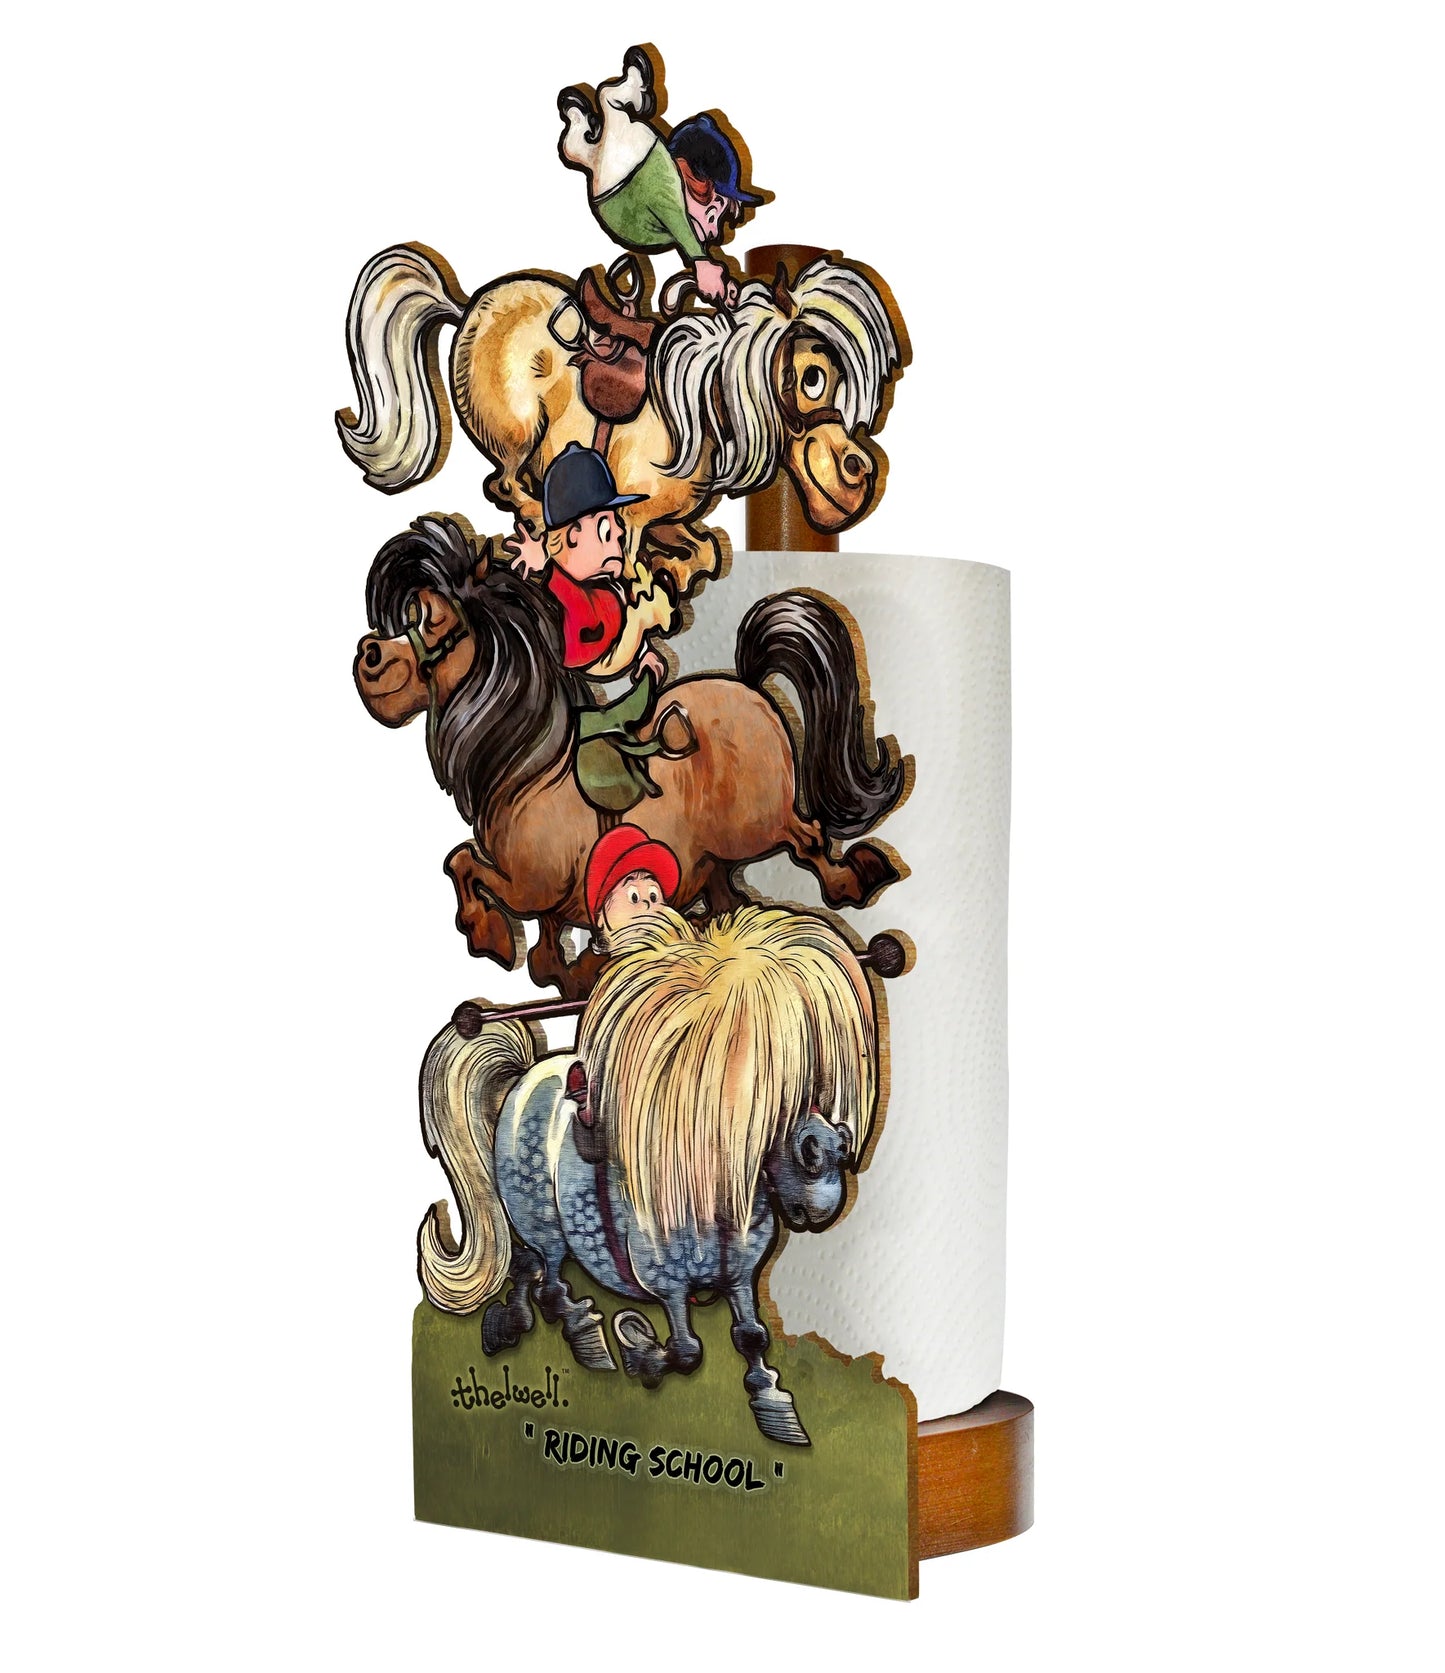 Loo Prints 'Riding School' Wooden Toilet Roll/ Kitchen Roll Holder